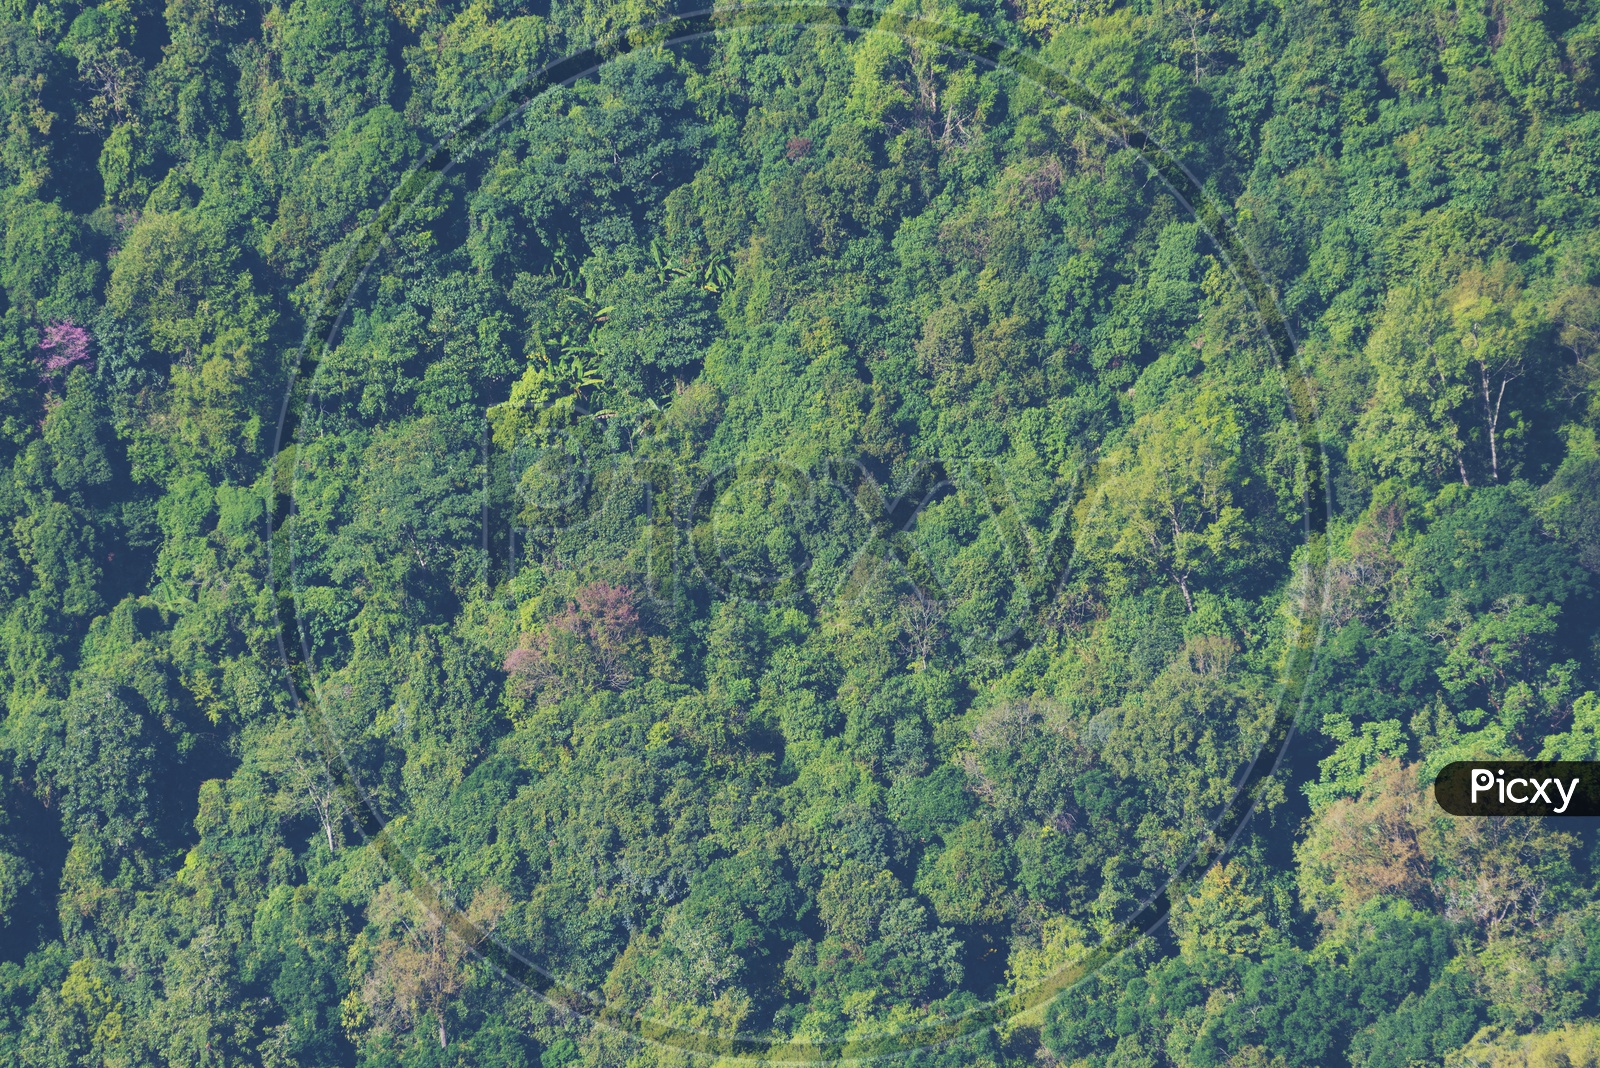 Bird eyes view of Trees, and greenery of a deep forest